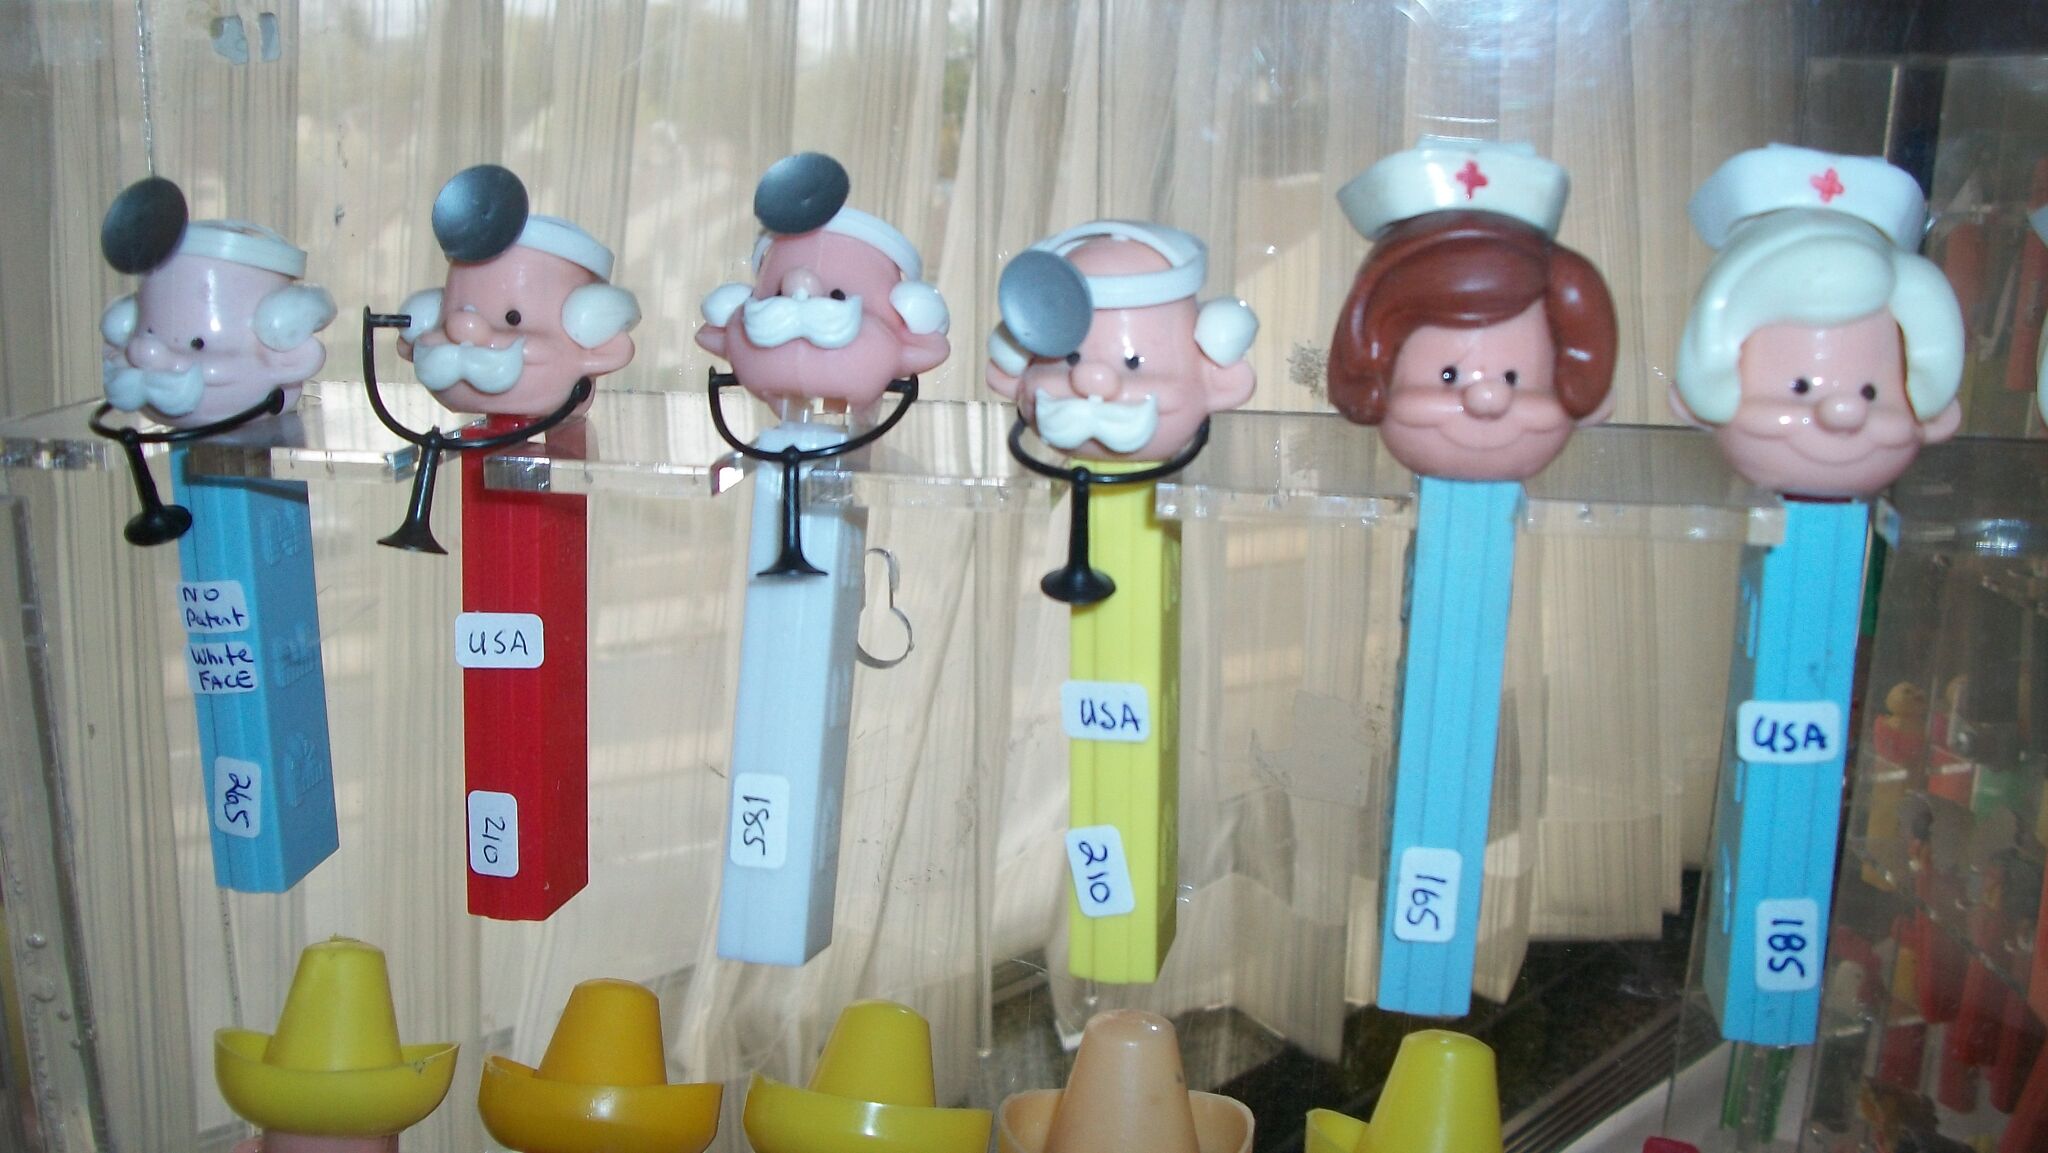 The Northeast PEZ Collector's Convention returns to Orange in May